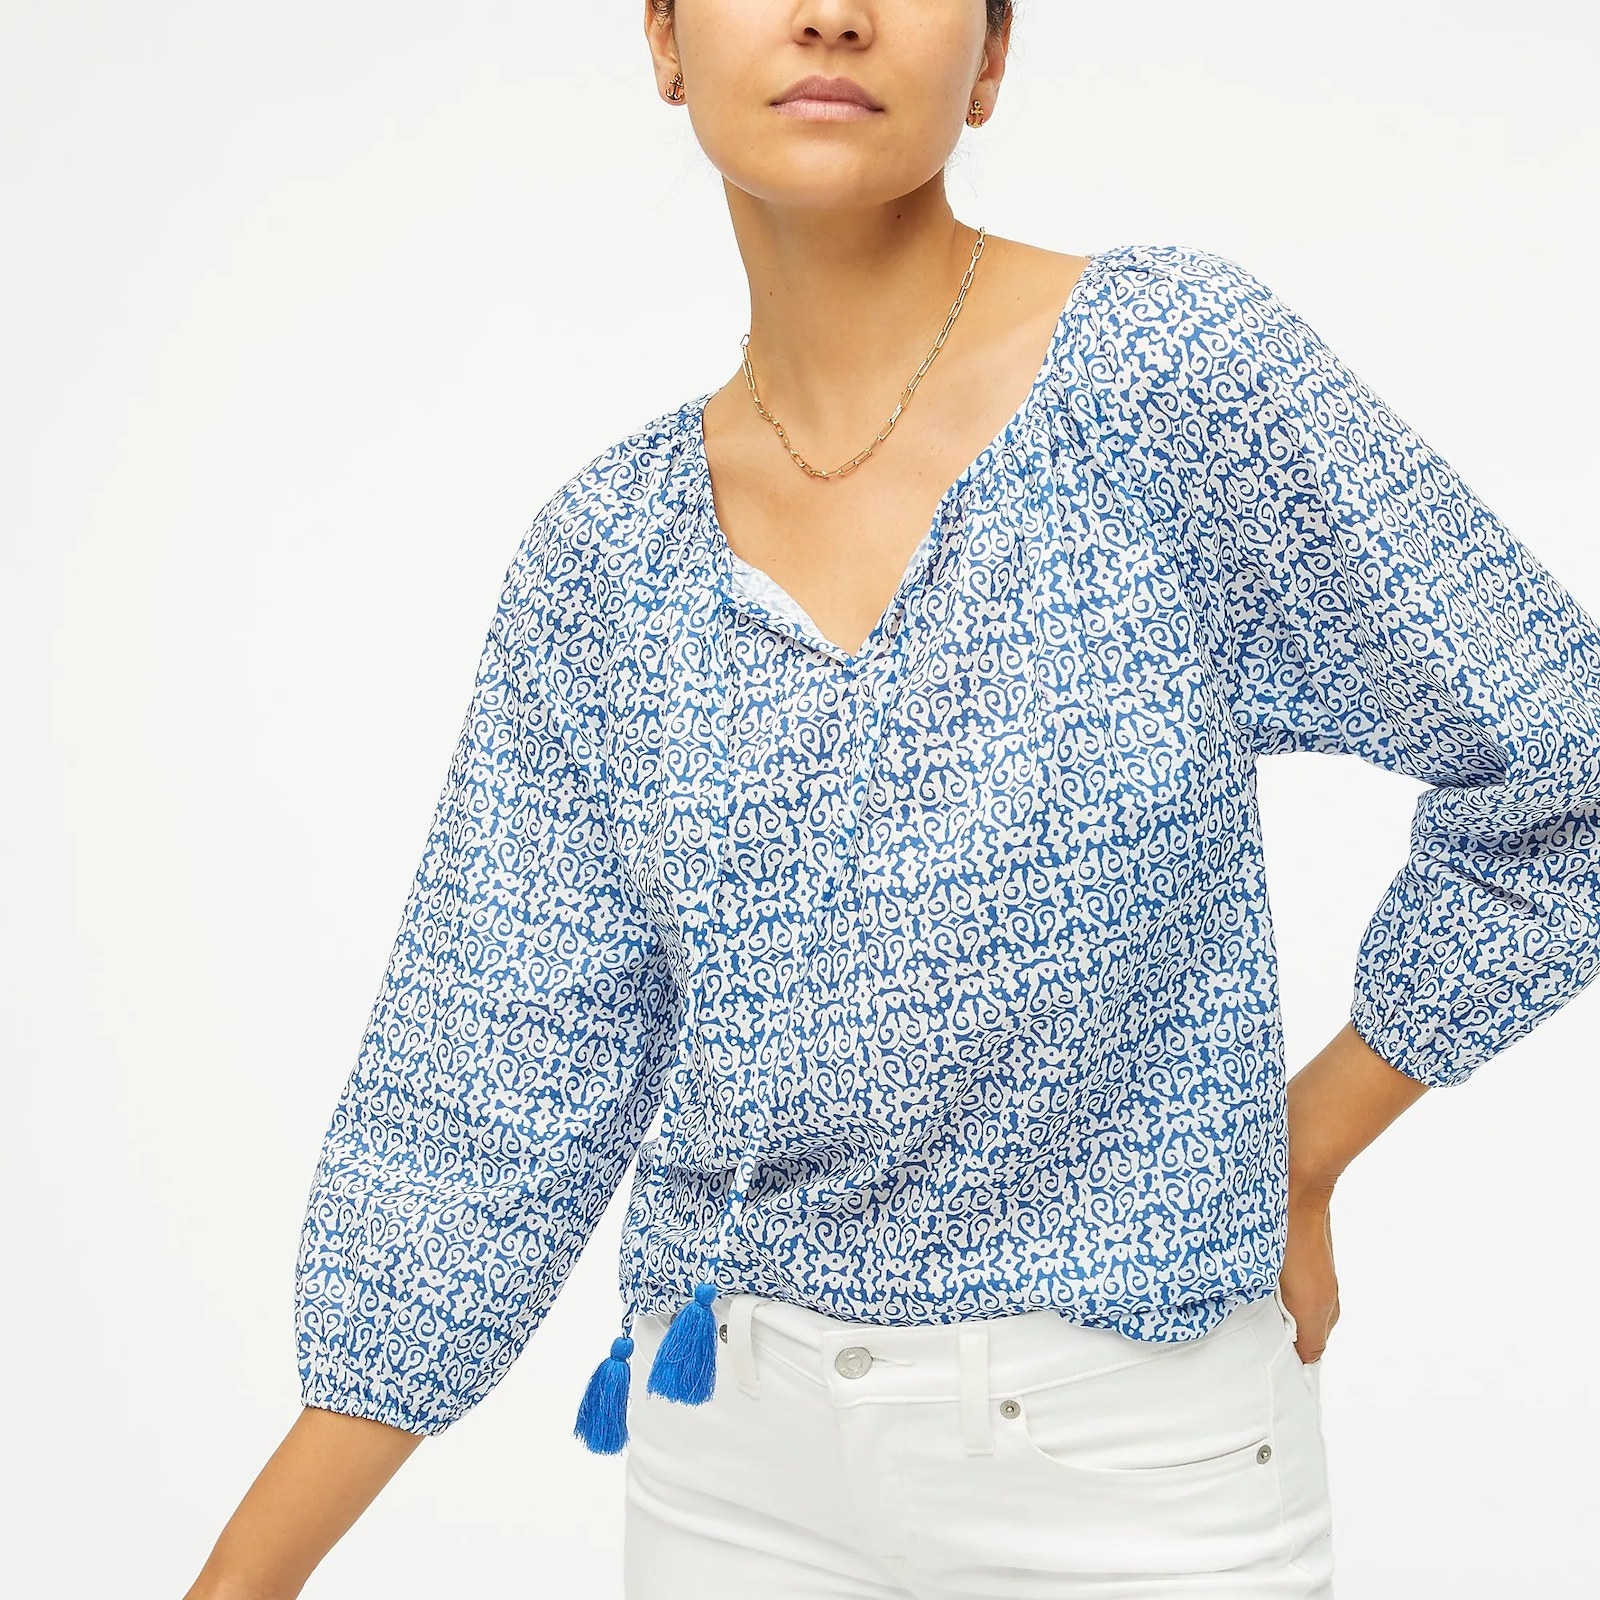 A model wearing the long sleeve blue and white top